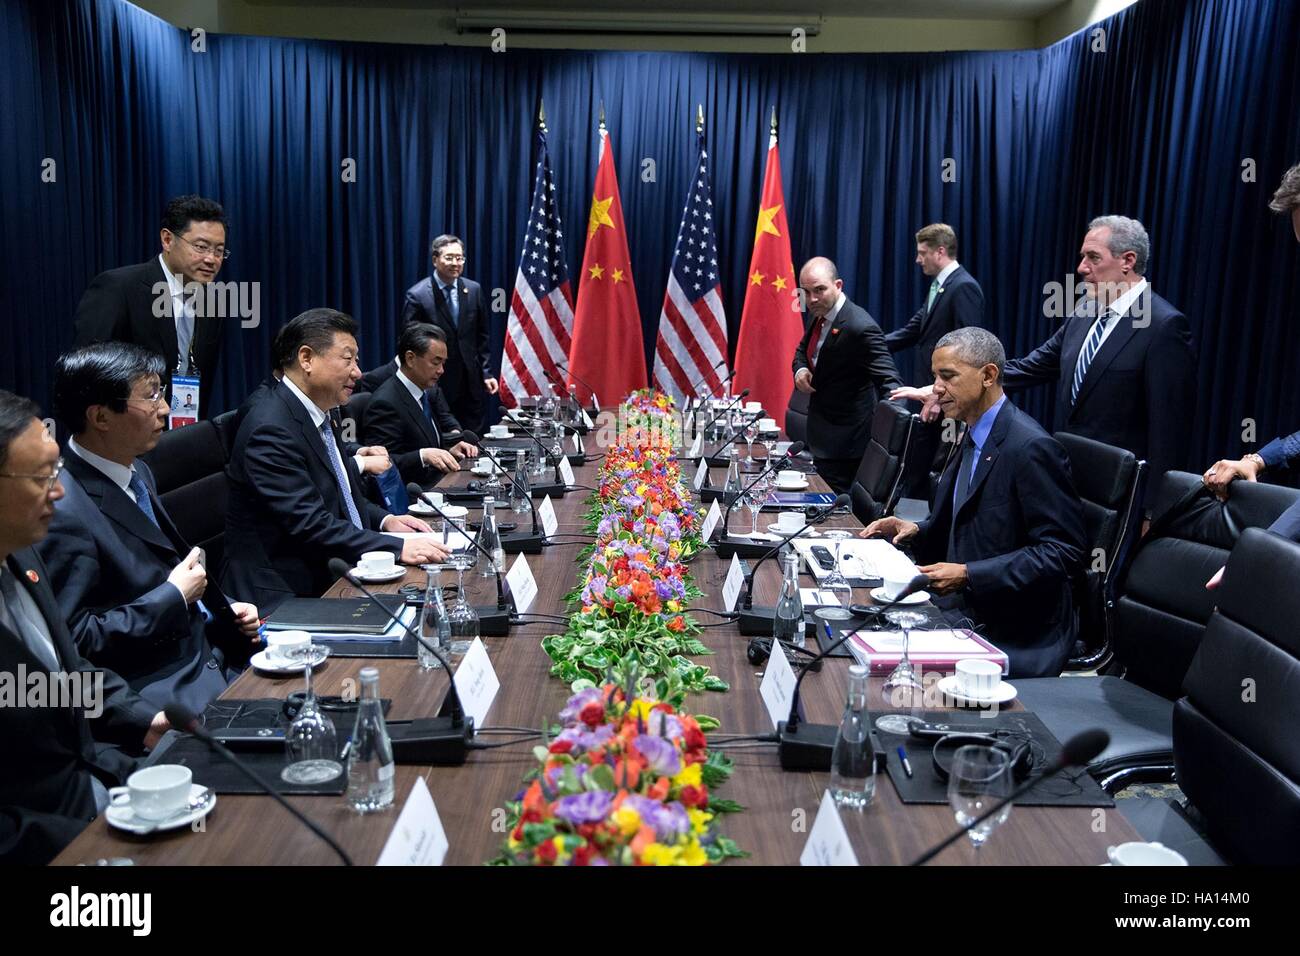 U.S. President Barack Obama and Chinese President Xi Jinping attend a meeting at the JW Marriott Hotel Lima November 19, 2016 in Lima, Peru. Stock Photo